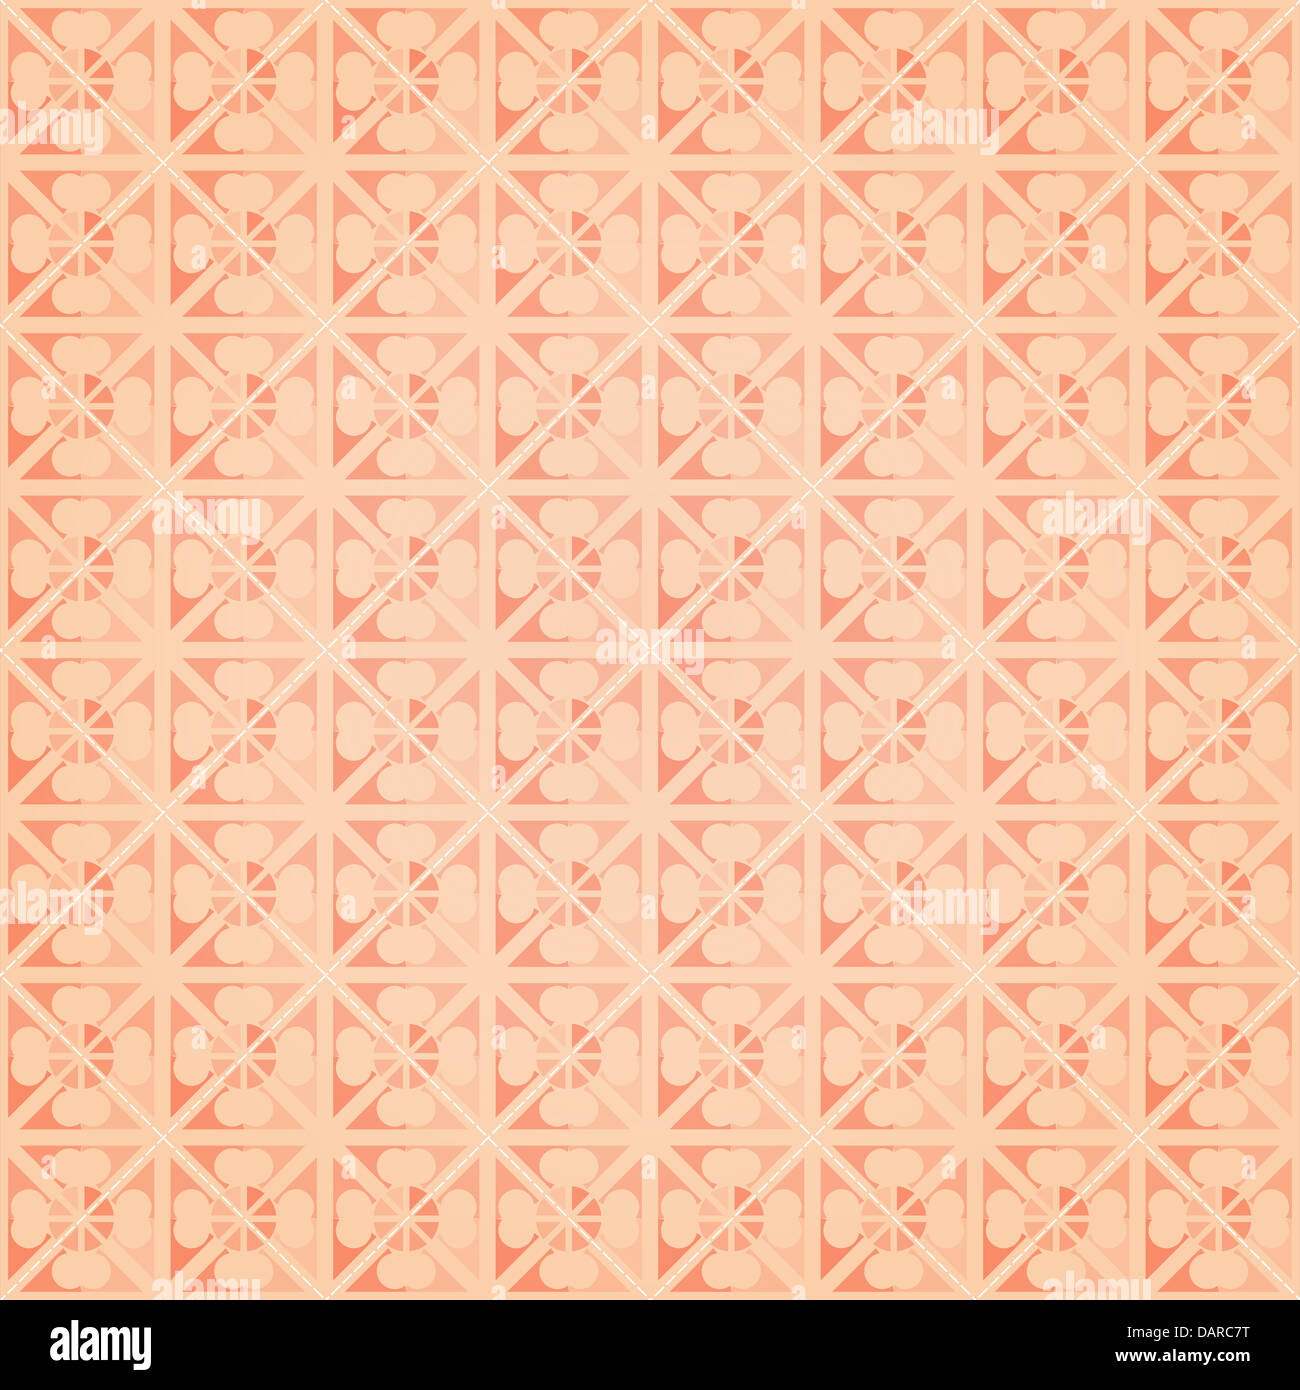 new abstract wallpaper with vintage style flowers can use like seamless pattern Stock Photo